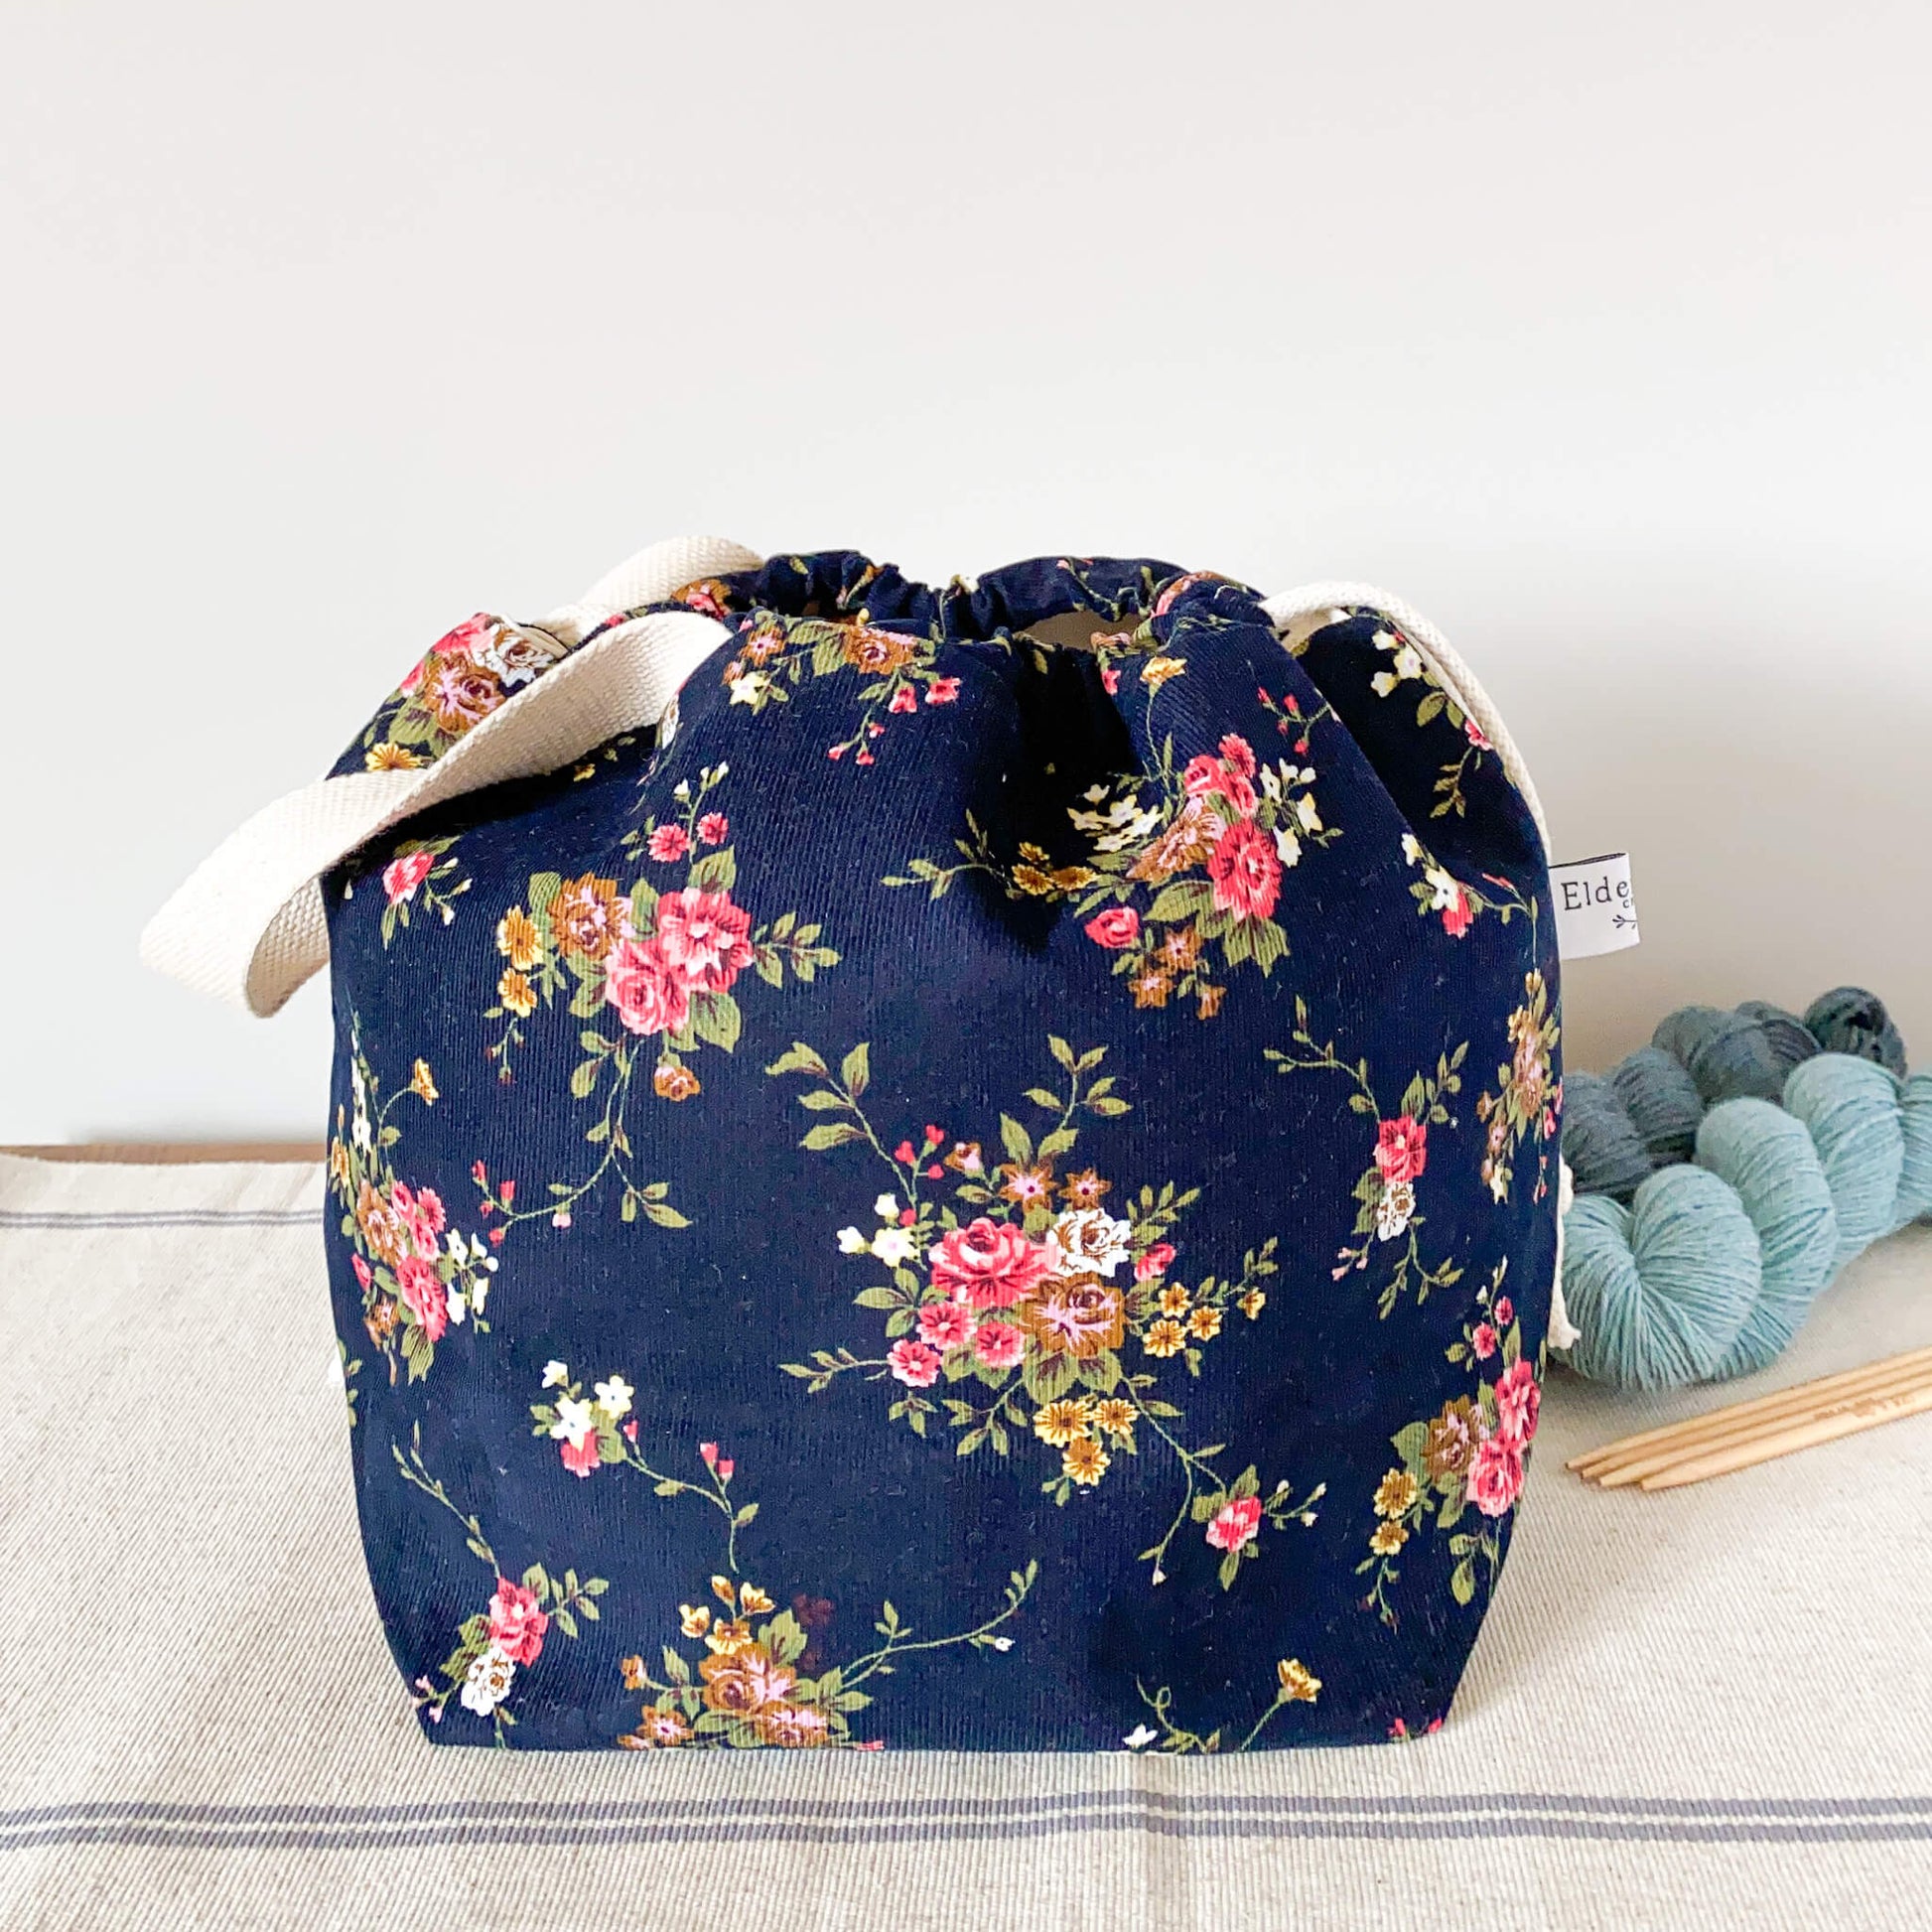 A deep blue project bag sits on a table next to two skeins of yarn. The blue fabric is printed with lots of small leaves and berries and acorns. The top of the bag is pulled closed by a drawstring. 